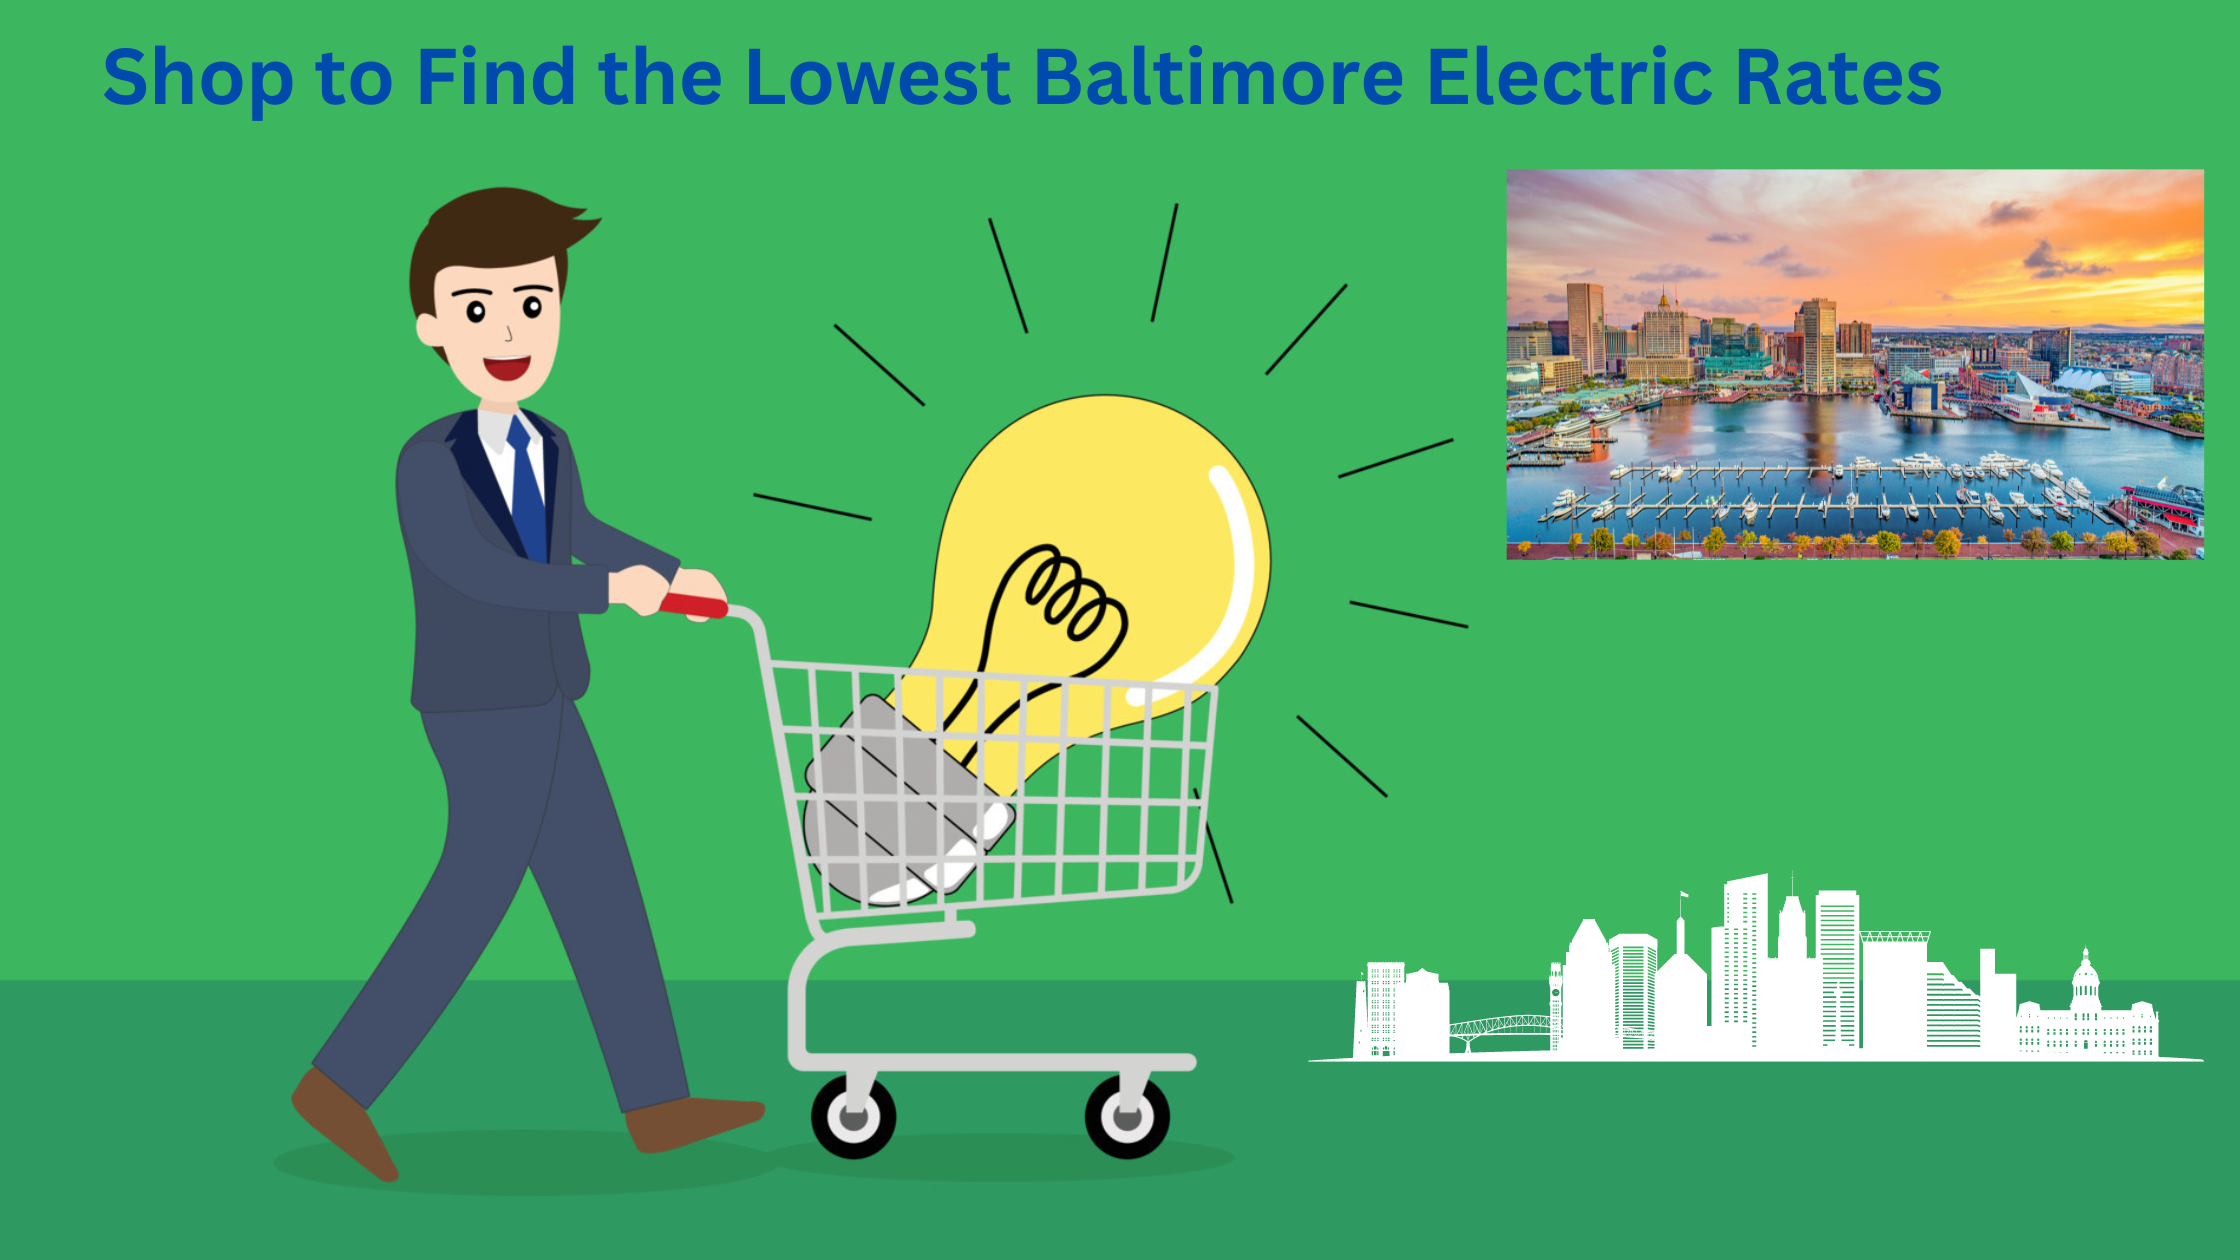 Man shopping for the lowest electric rates in Baltimore